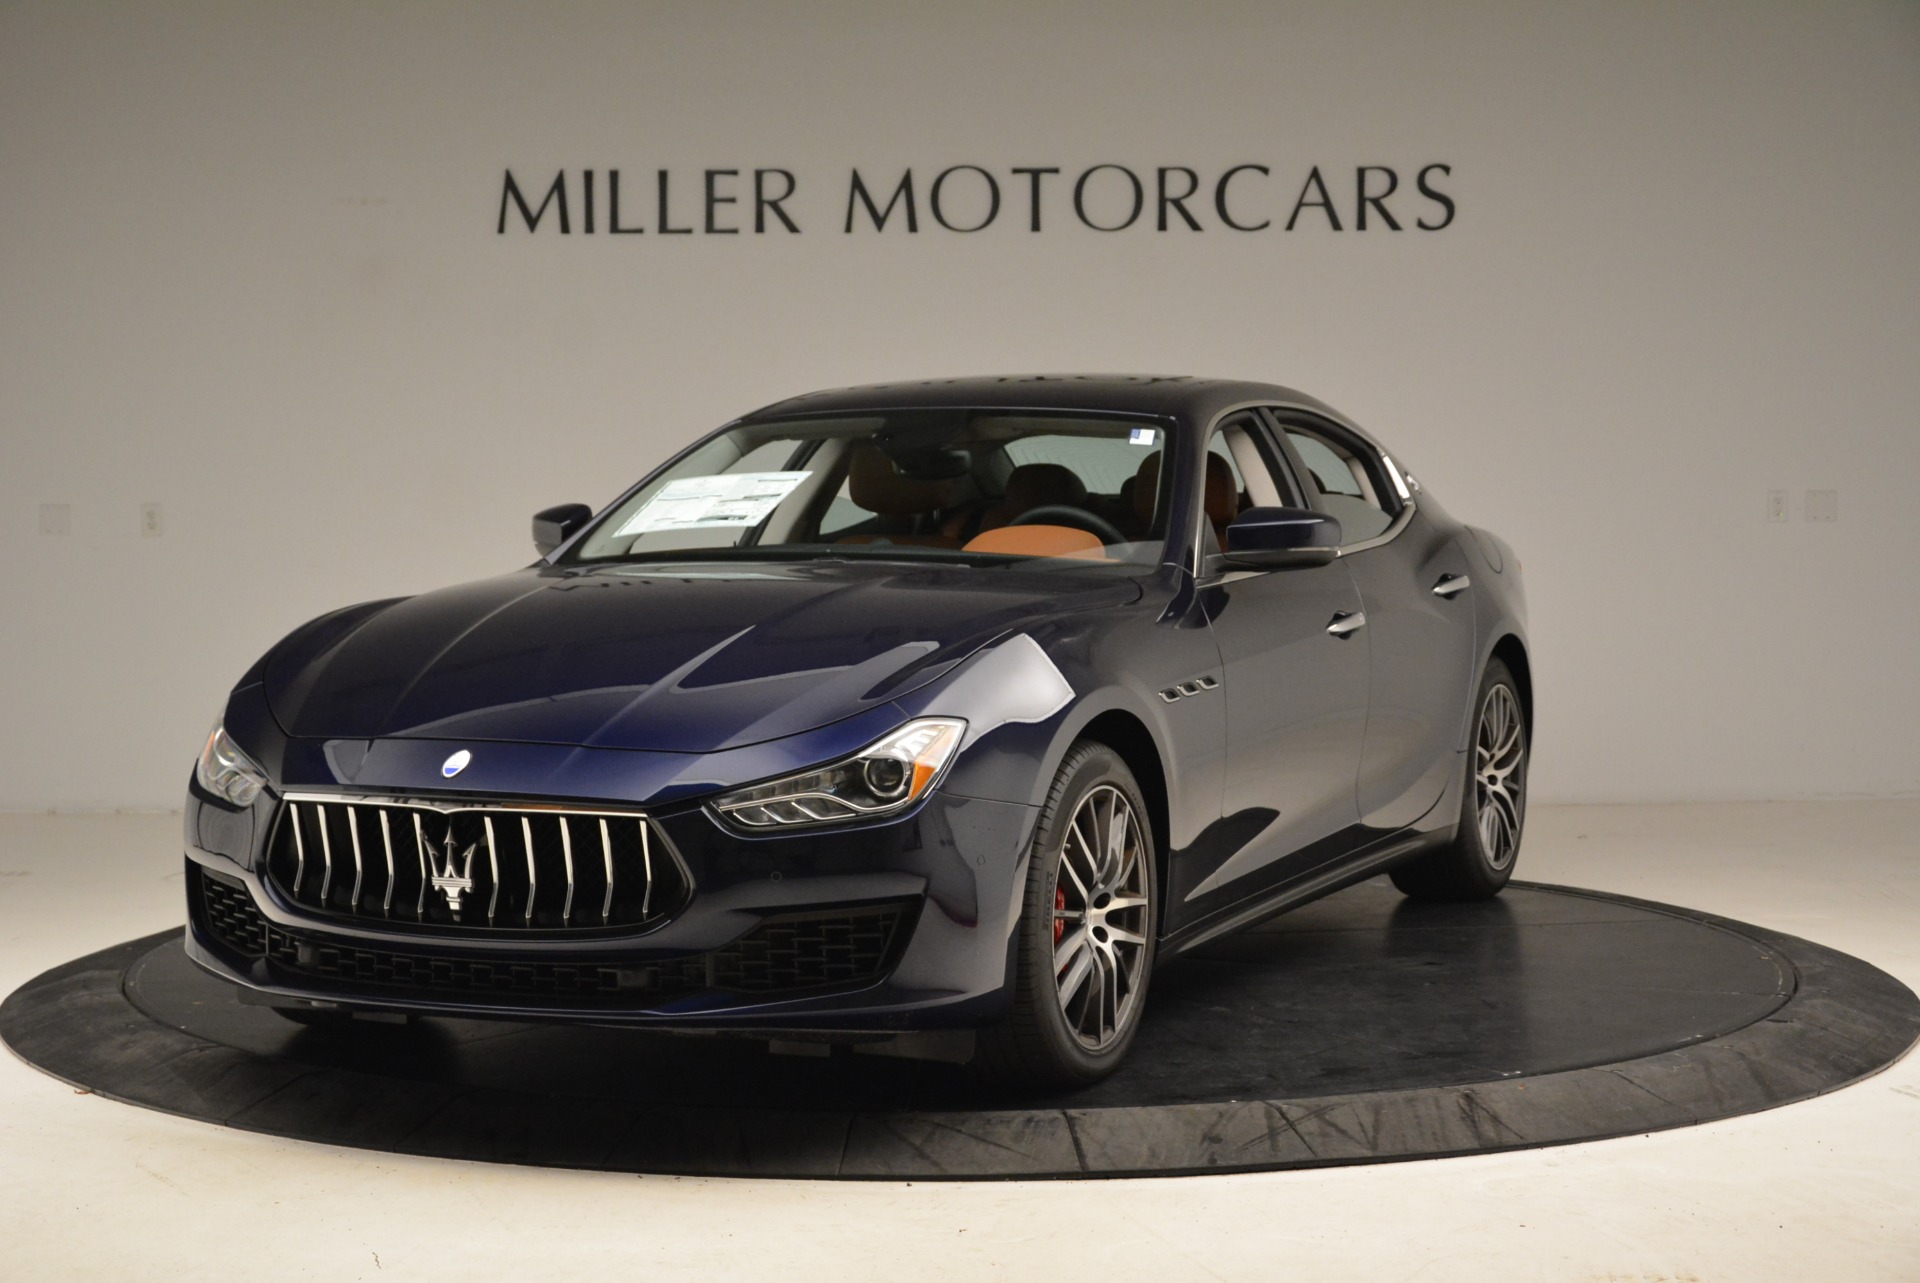 New 2019 Maserati Ghibli S Q4 for sale Sold at Pagani of Greenwich in Greenwich CT 06830 1